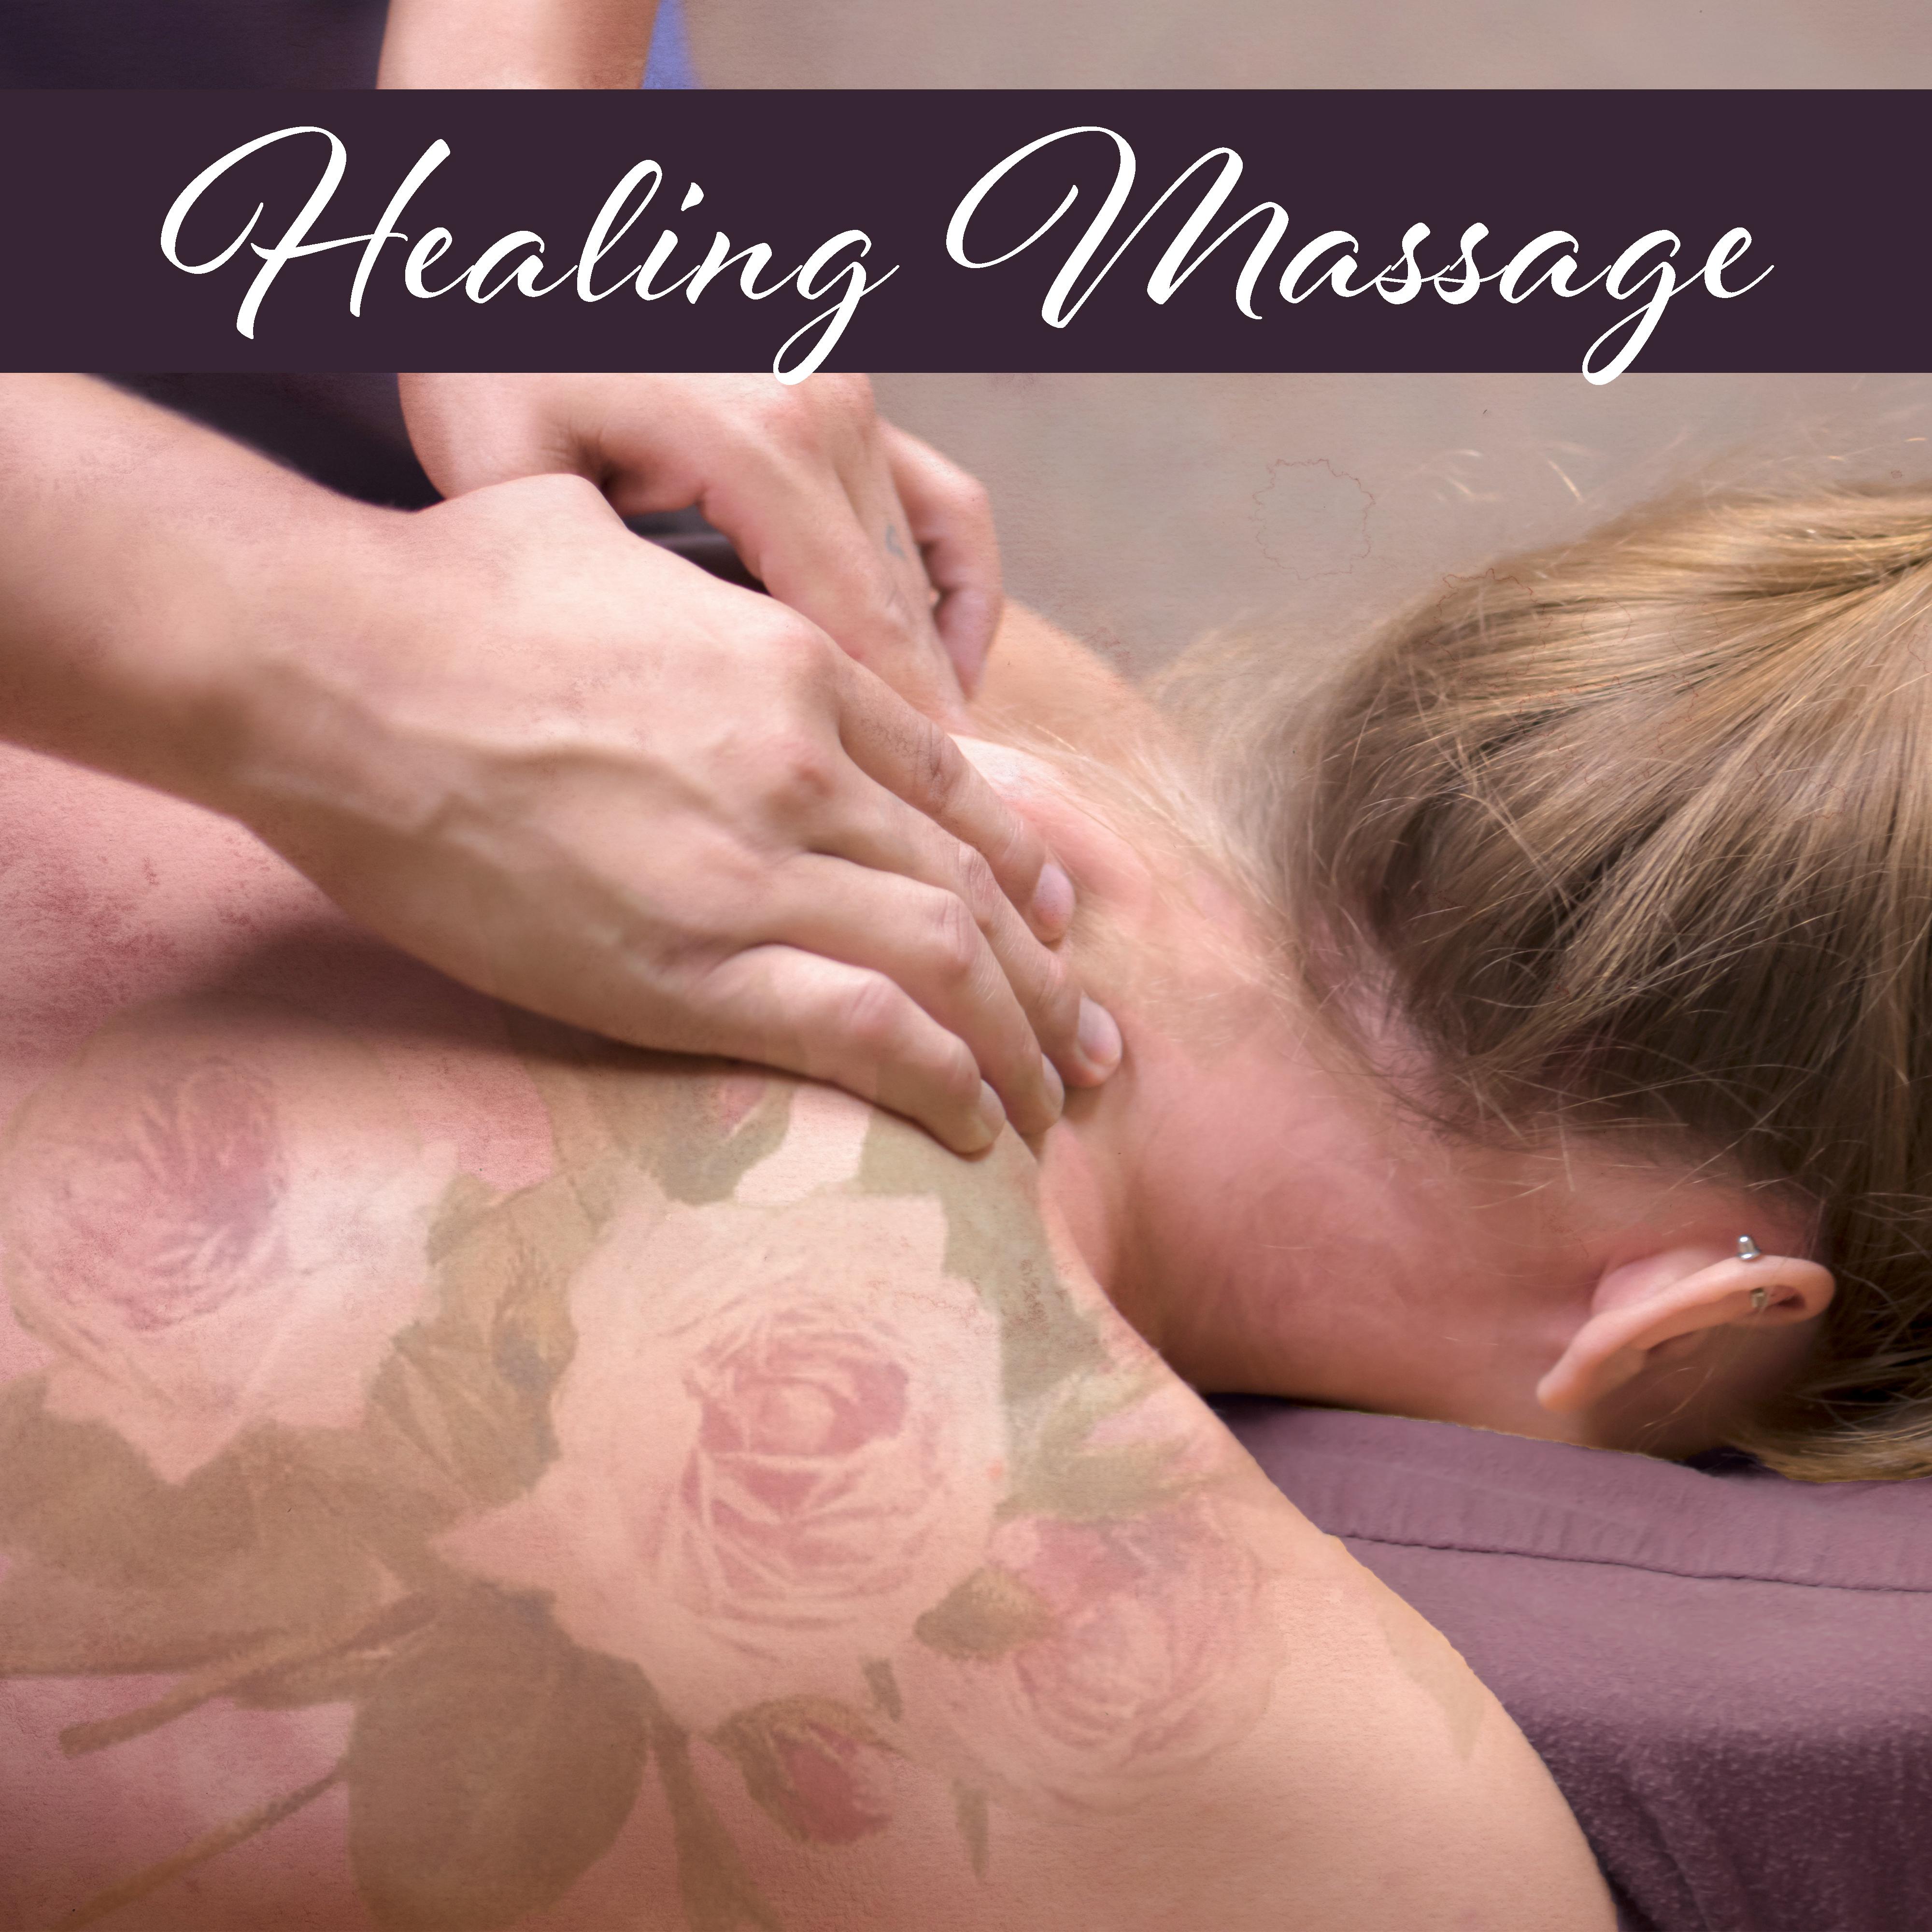 Healing Massage  Therapy Sounds, Relaxing Music for Spa, Wellness, Relaxation, Stress Relief, Reiki, Tranquility